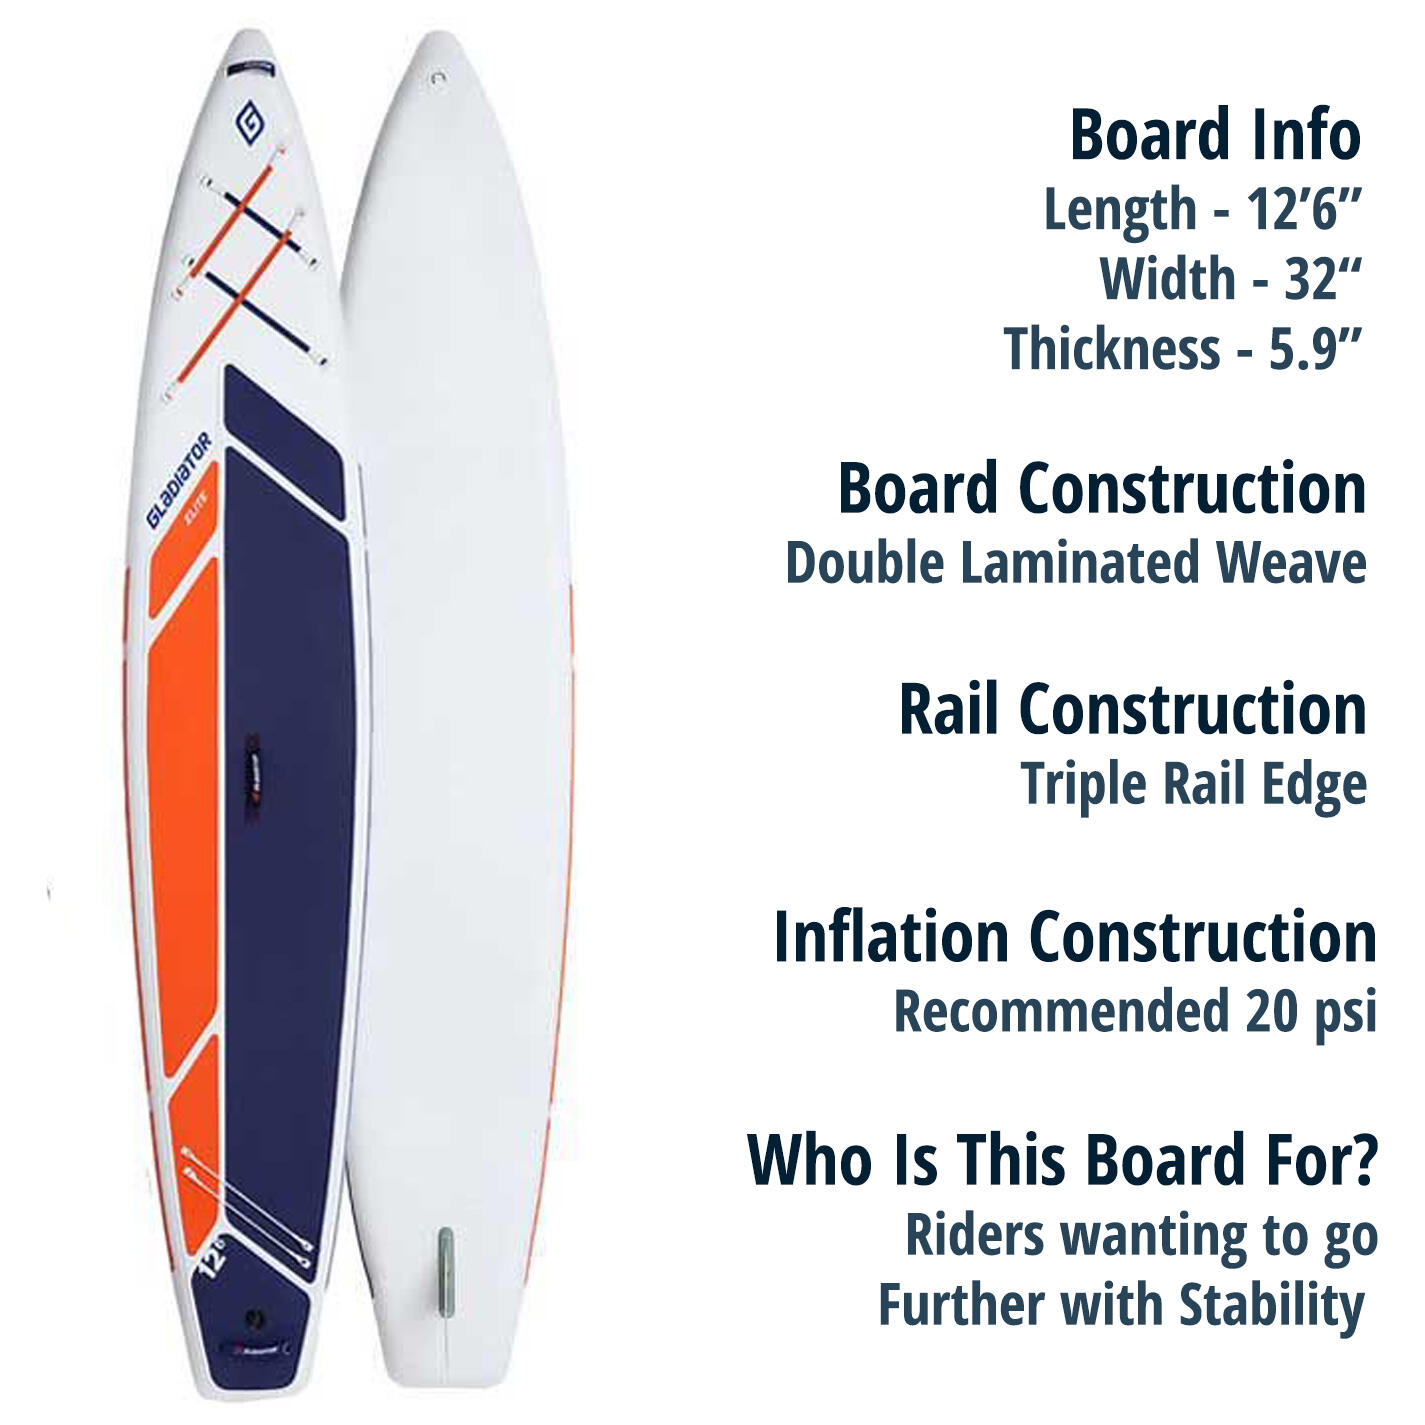 Gladiator Elite Touring 12'6 x 32” x 5.9” Touring Paddle Board For Stability 2/7